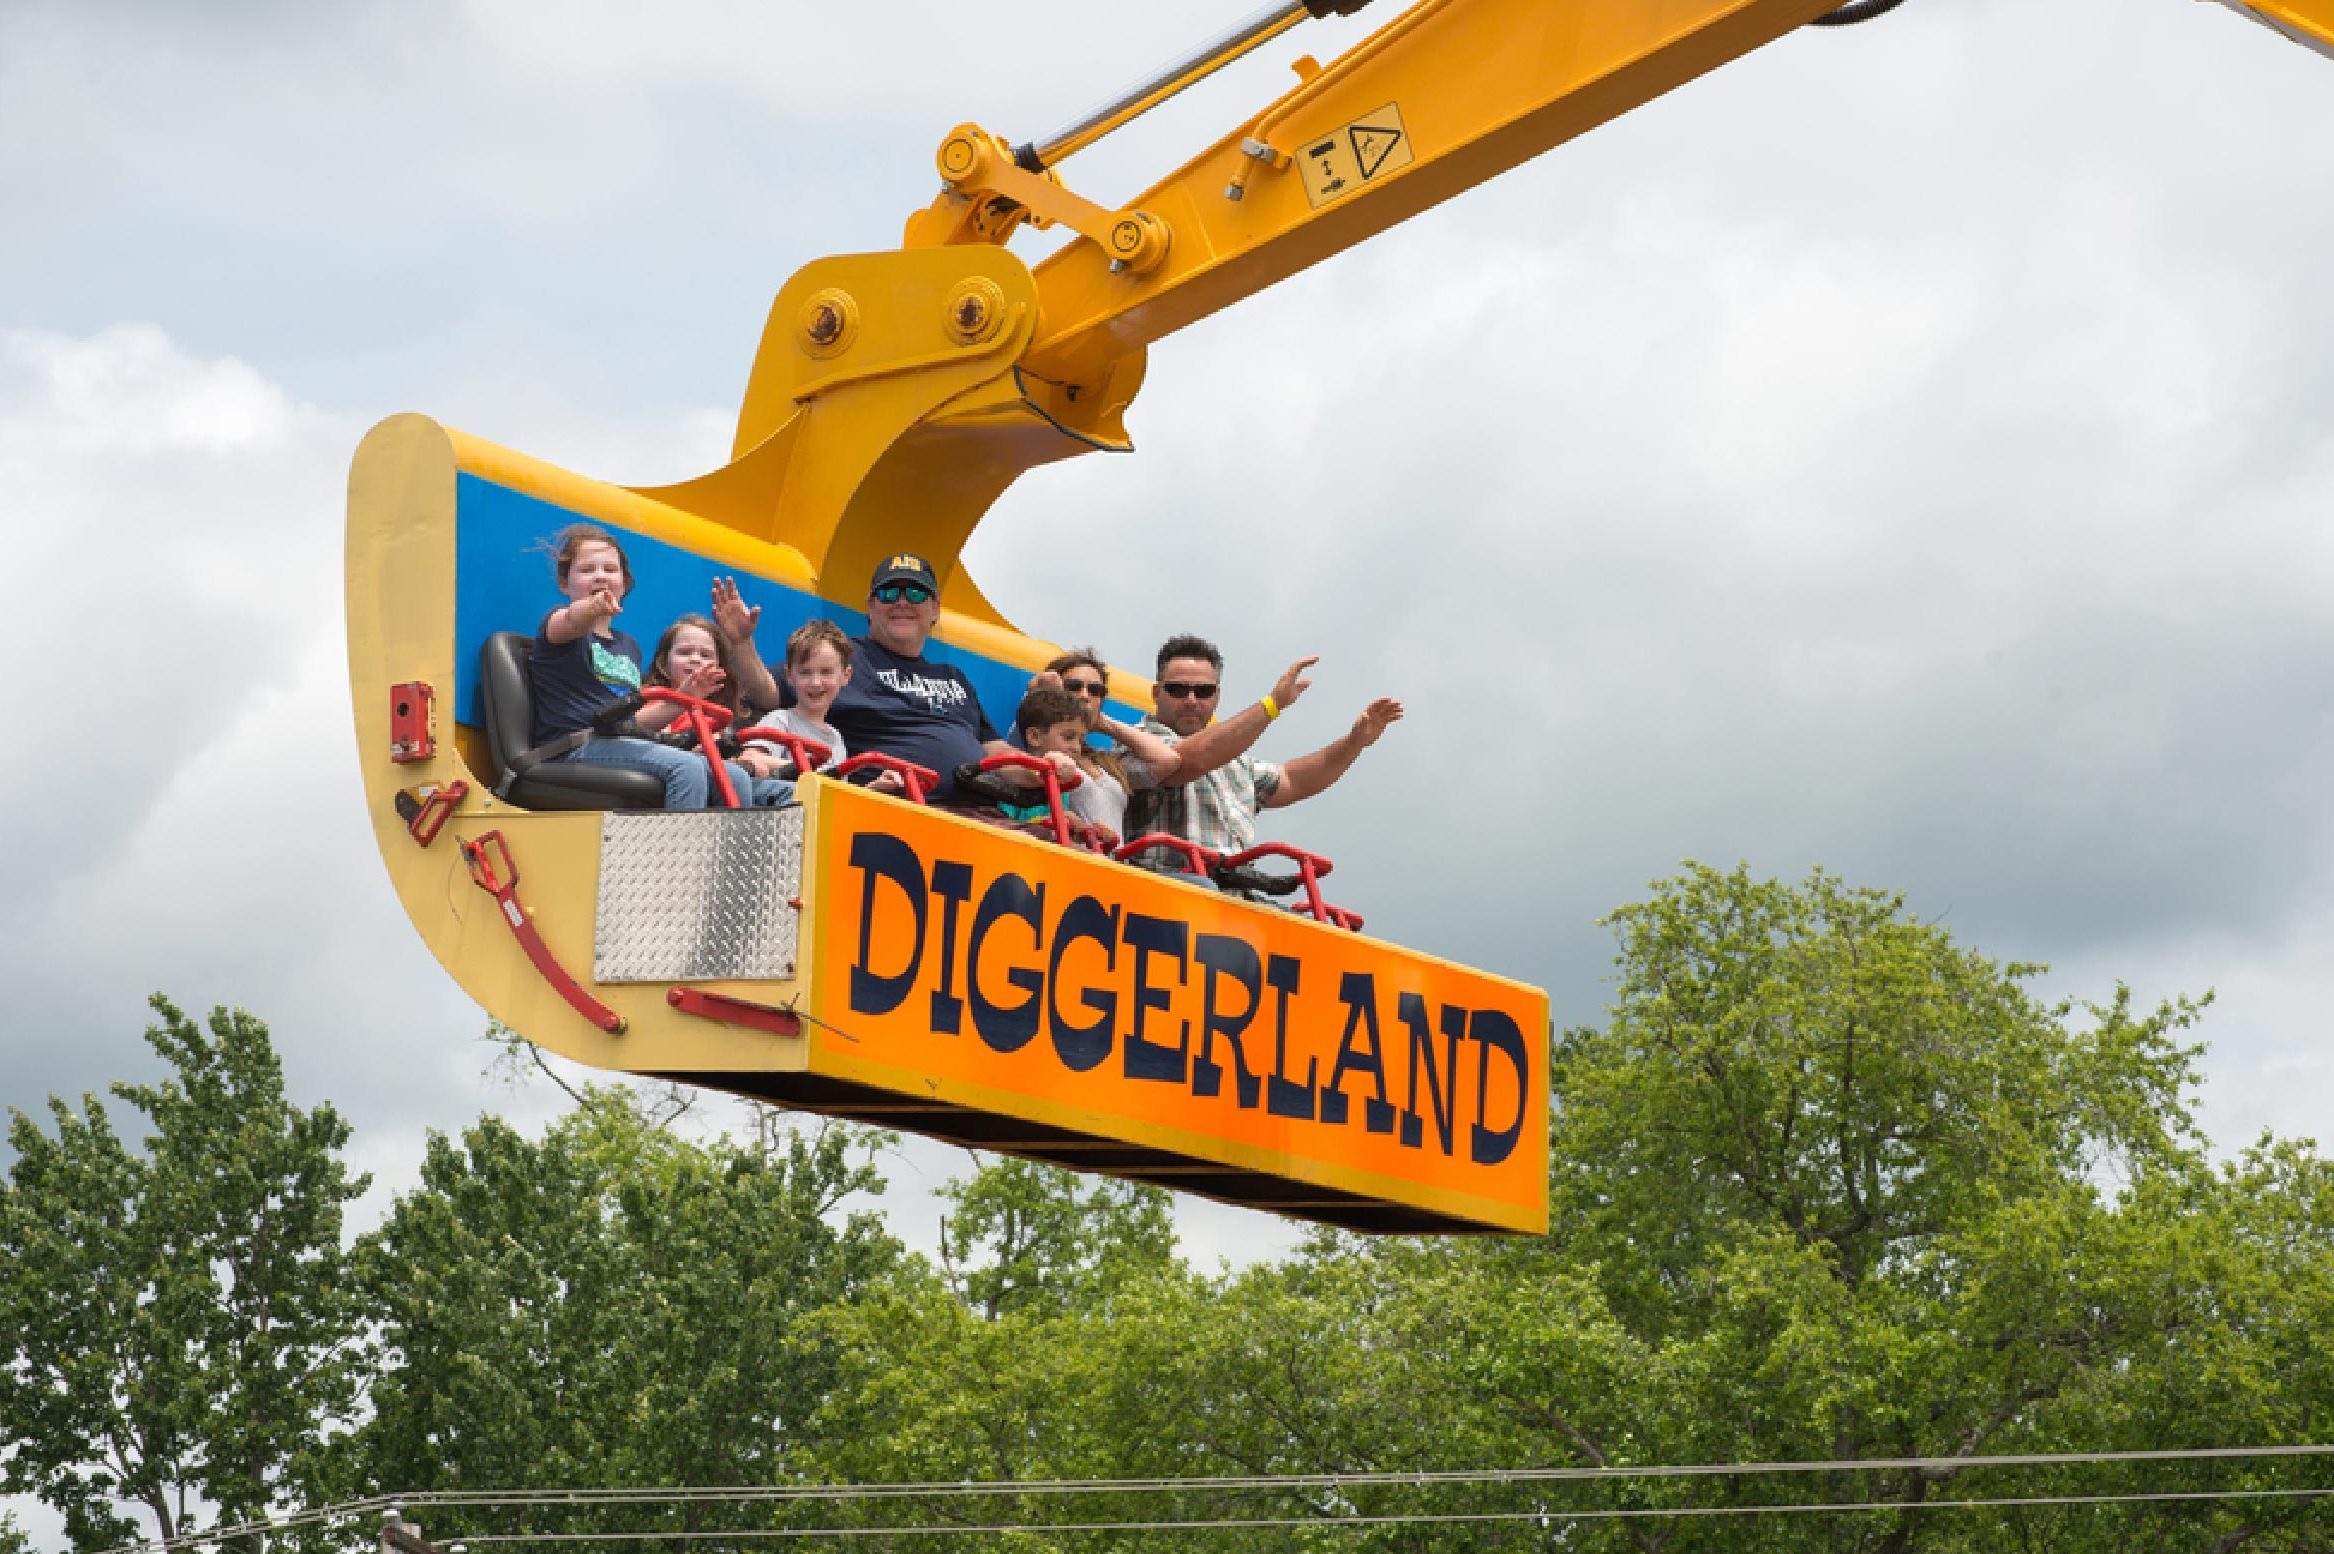 <p>Average theme parks, step aside. <a href="https://www.tripadvisor.com/Attraction_Review-g46910-d6759517-Reviews-Diggerland-West_Berlin_New_Jersey.html" rel="noopener">Diggerland</a> is a construction theme park complete with trucks, tractors, diggers and even a zip line. Most attractions have a height requirement as well as a Diggerland ride operator to help you navigate. The hours are subject to change, but they are open mainly on Saturday and Sunday, with select weekday openings throughout the year.</p> <p class="listicle-page__cta-button-shop"><a class="shop-btn" href="https://www.tripadvisor.com/Attraction_Review-g46910-d6759517-Reviews-Diggerland-West_Berlin_New_Jersey.html">Learn More</a></p>